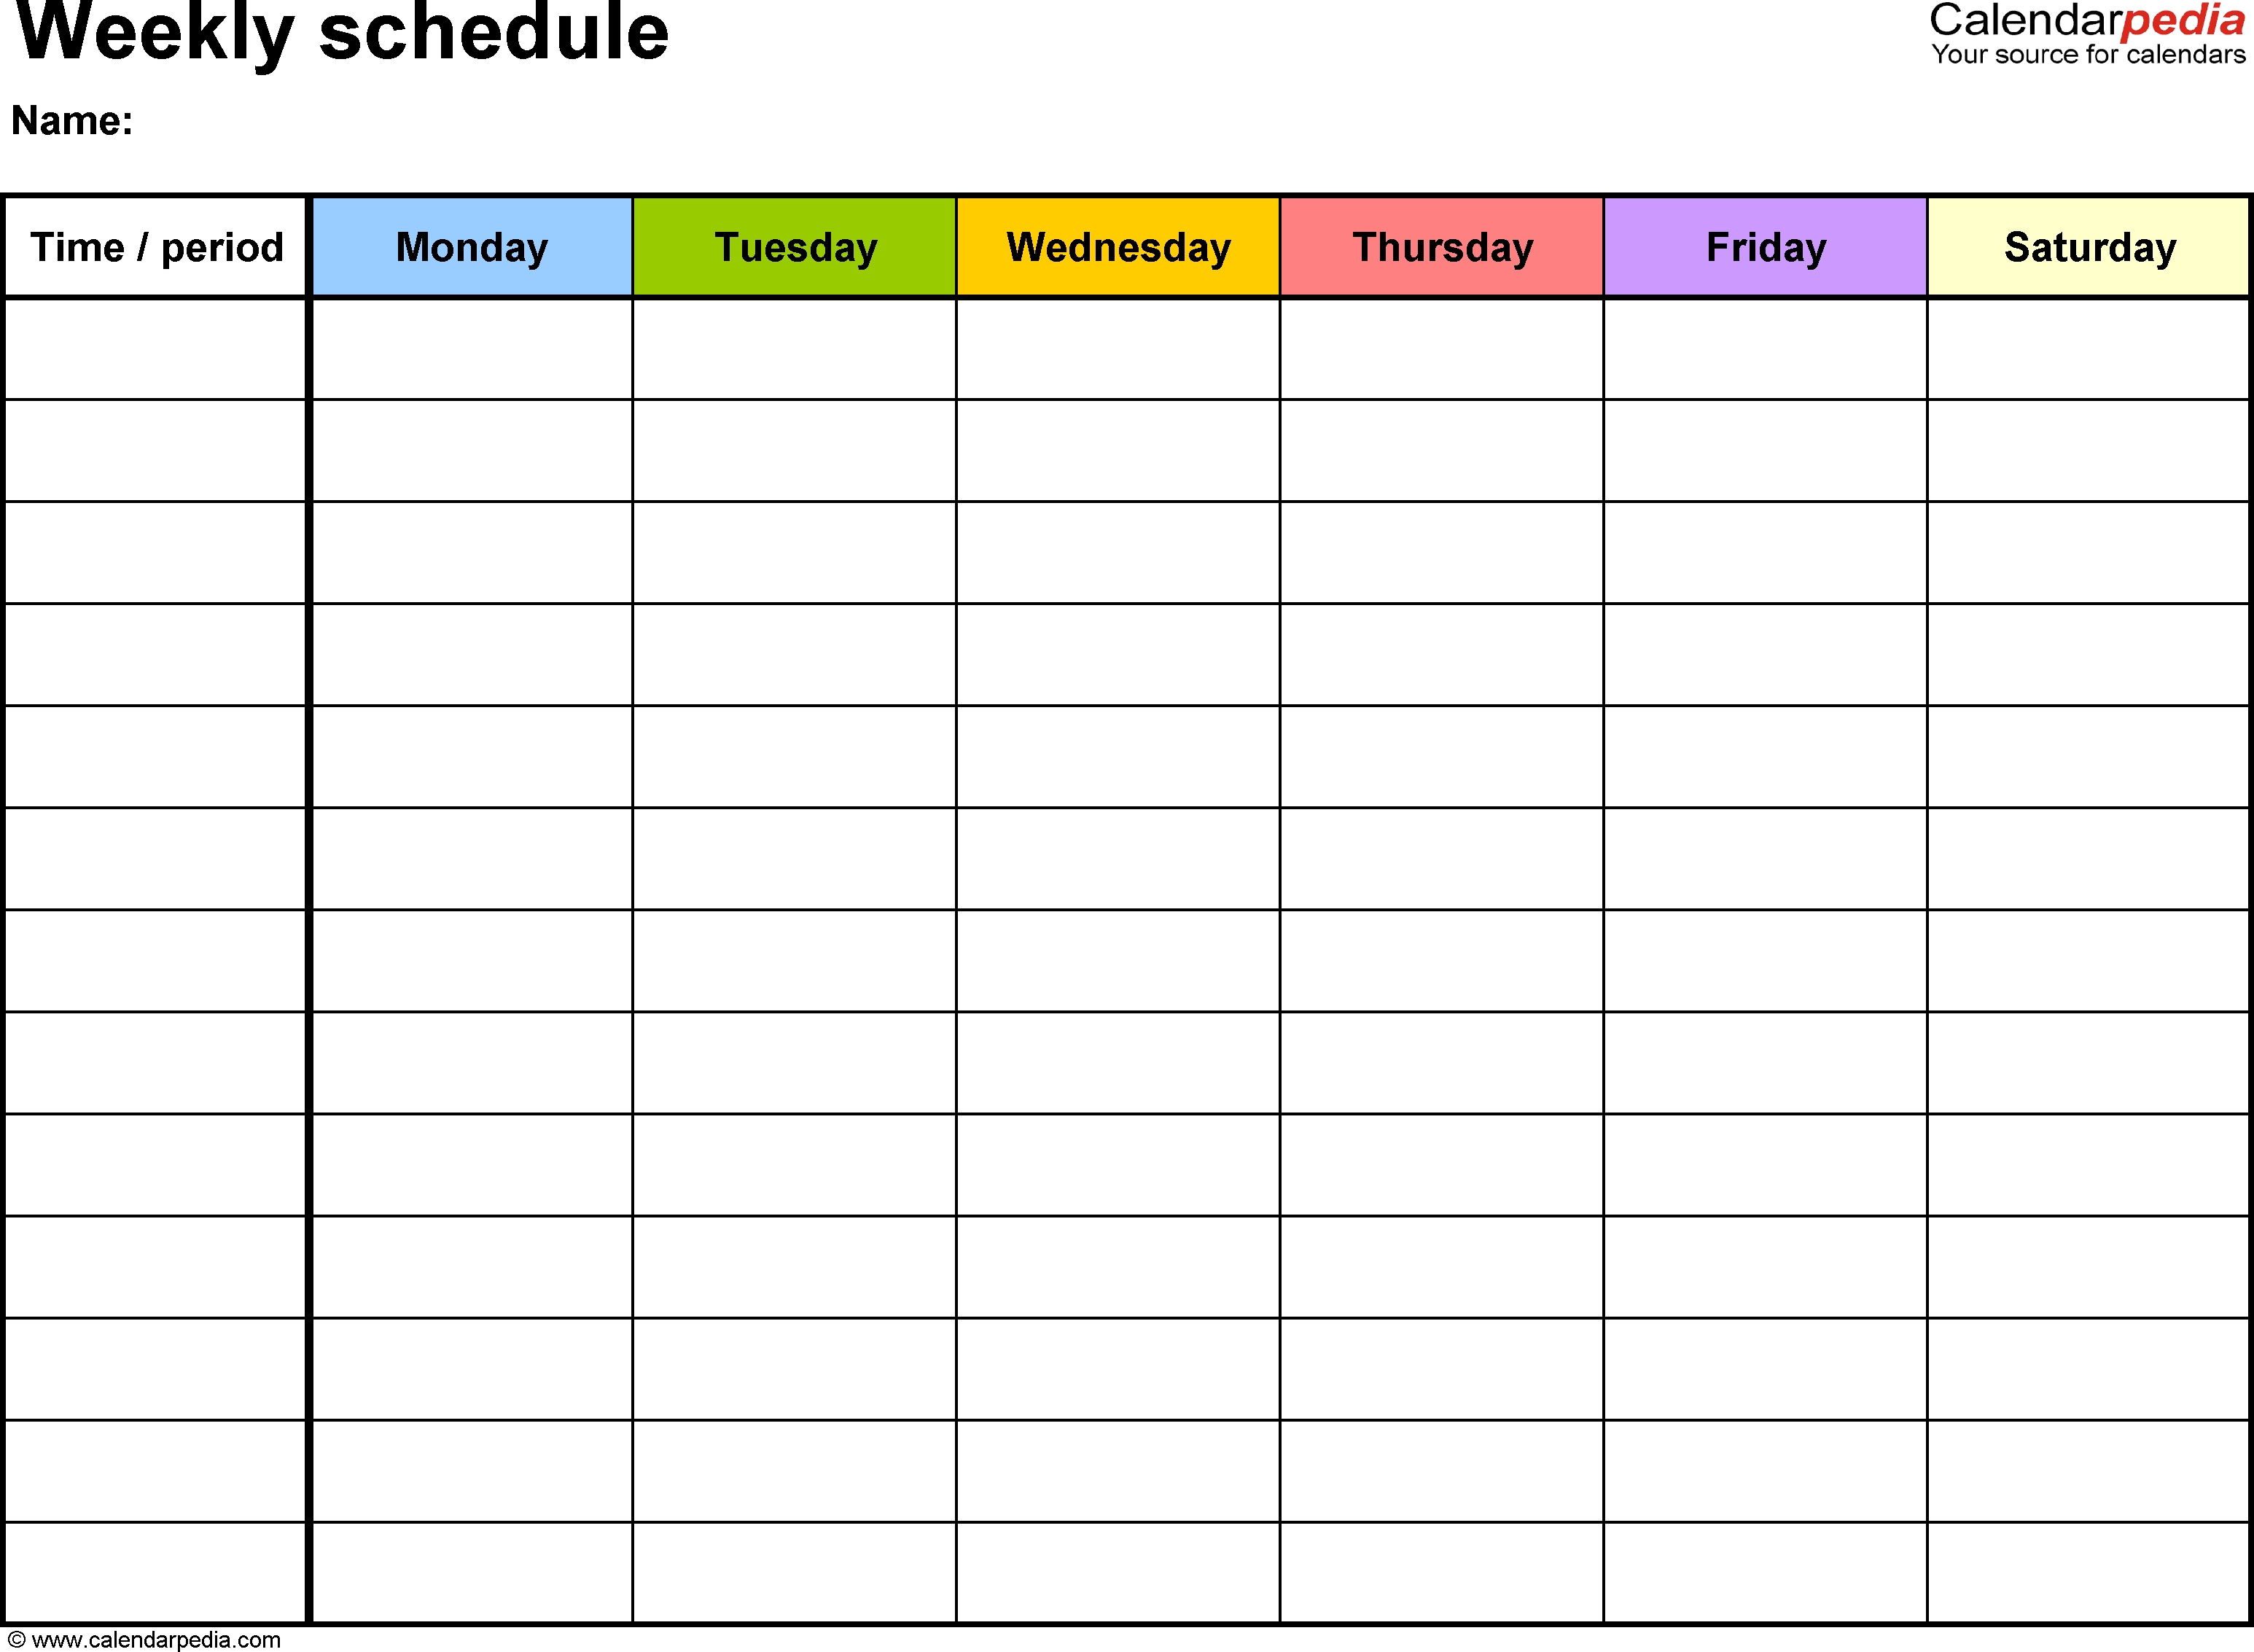 Free Weekly Schedule Templates For Word - 18 Templates-5 Day Week Calendar Template